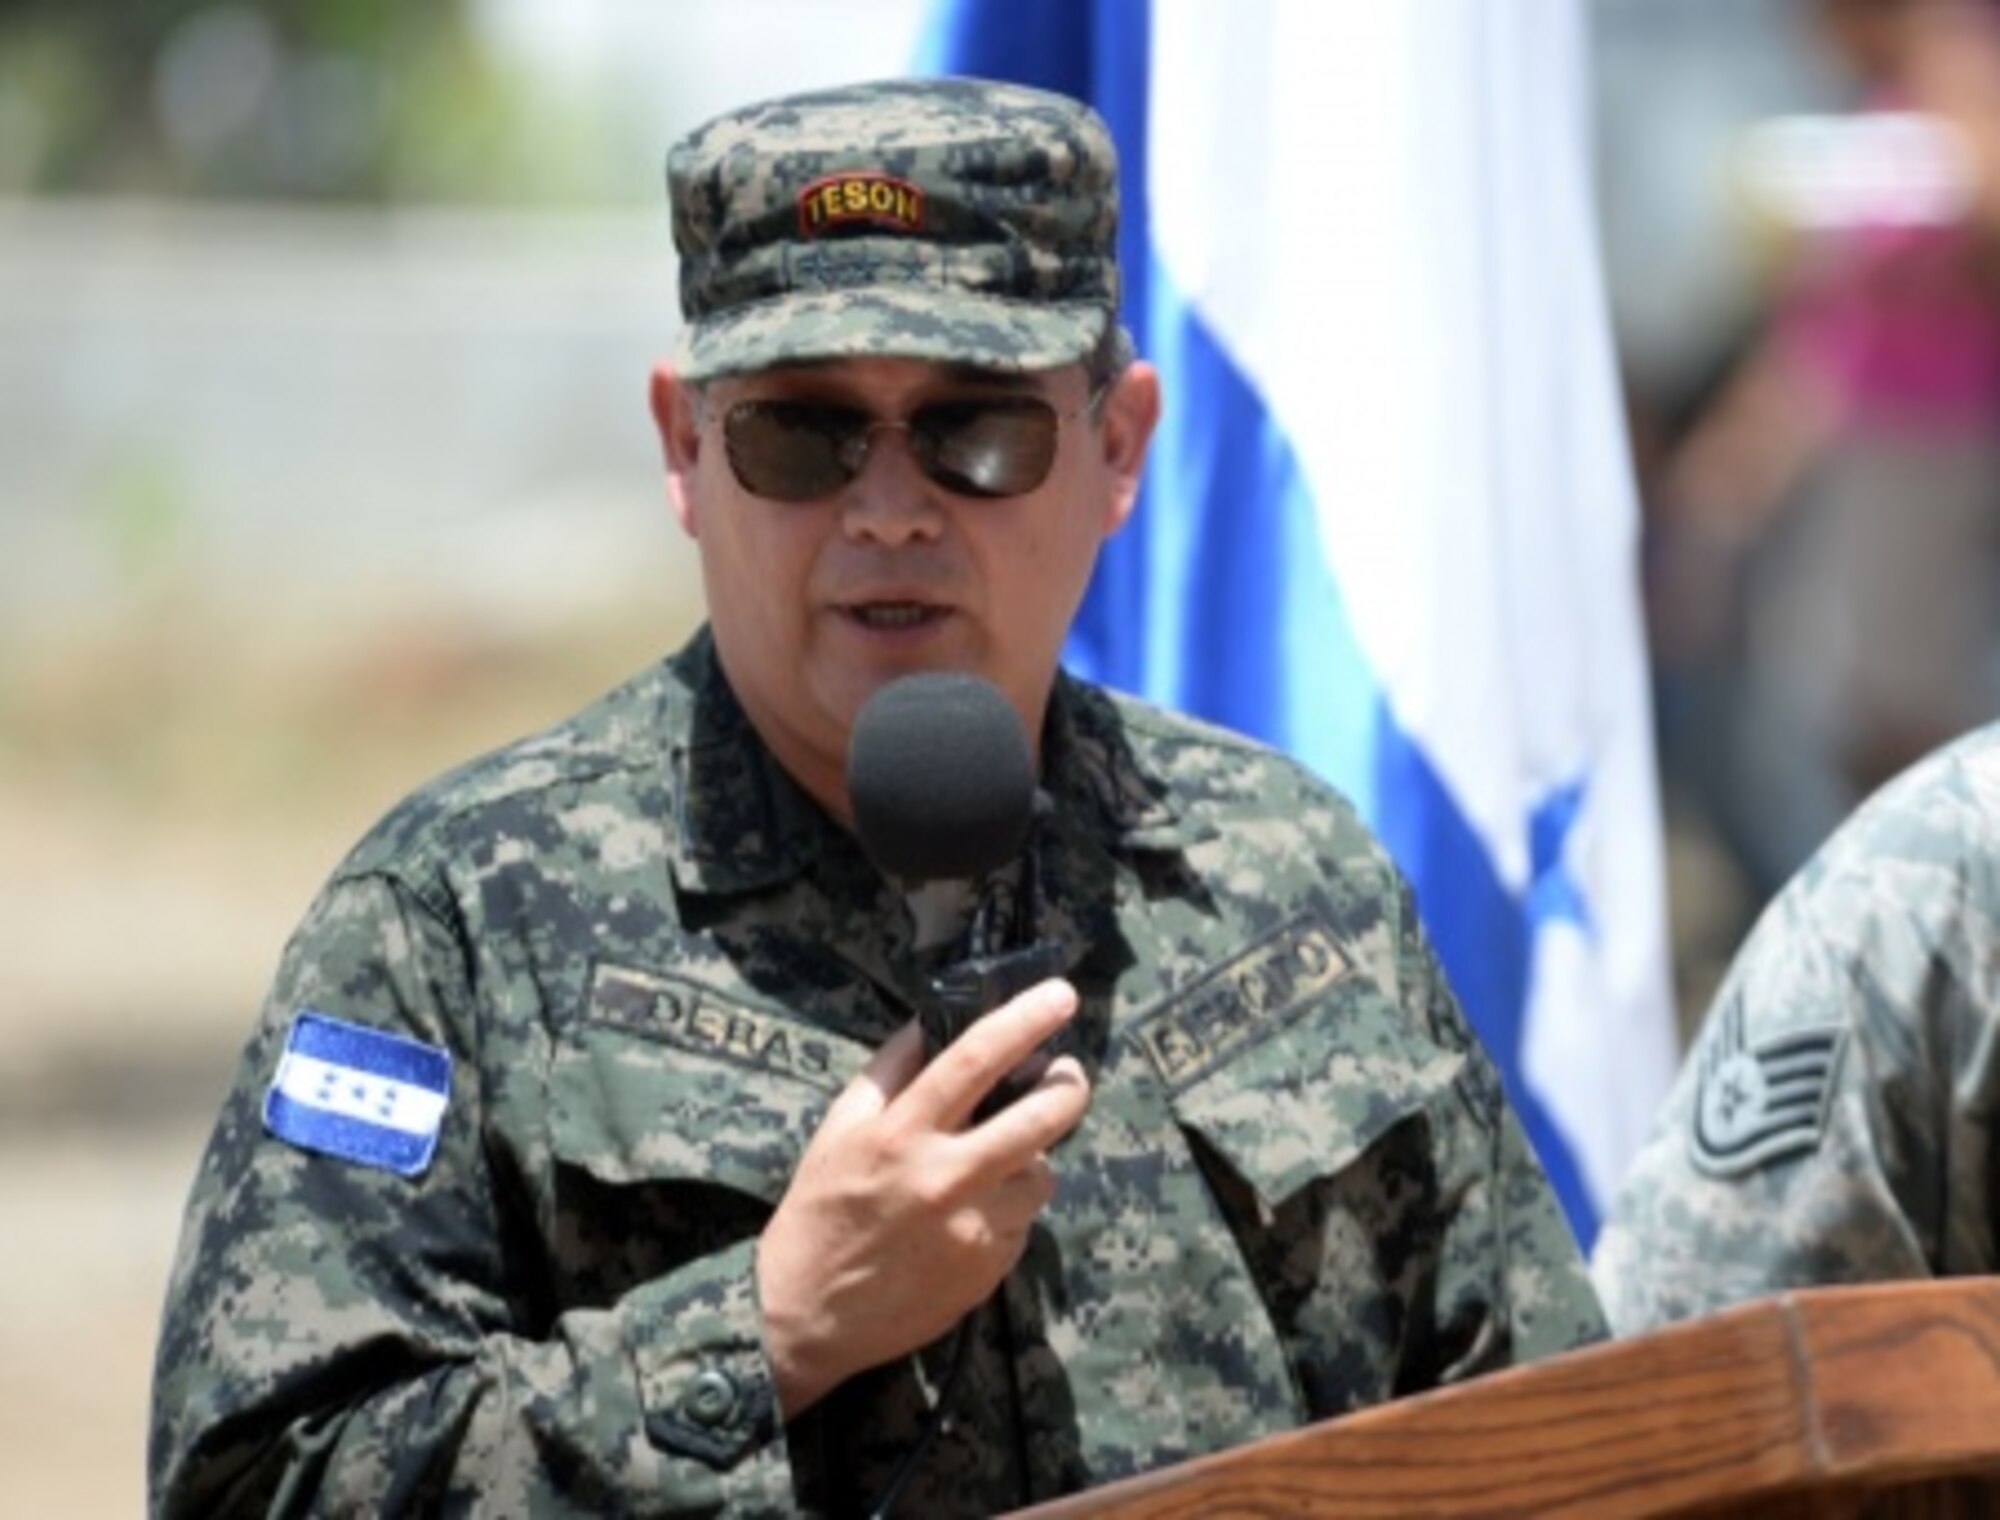 Col. Rafael Deras, 15th Honduran Army’s Battalion commander speaks at the ribbon-cutting ceremony for the new two-classroom schoolhouse at the Gabriela Mistral school in Ocotes Alto, Honduras, July 28, 2015. The event marked the official opening of the building which was one of the key projects as part of the New Horizons Honduras 2015 training exercise taking place in and around Trujillo, Honduras. New Horizons was launched in the 1980s and is an annual joint humanitarian assistance exercise that U.S. Southern Command conducts with a partner nation in Central America, South America or the Caribbean. The exercise improves joint training readiness of U.S. and partner nation civil engineers, medical professionals and support personnel through humanitarian assistance activities. (U.S. Air Force photo by Capt. David J. Murphy/Released)
